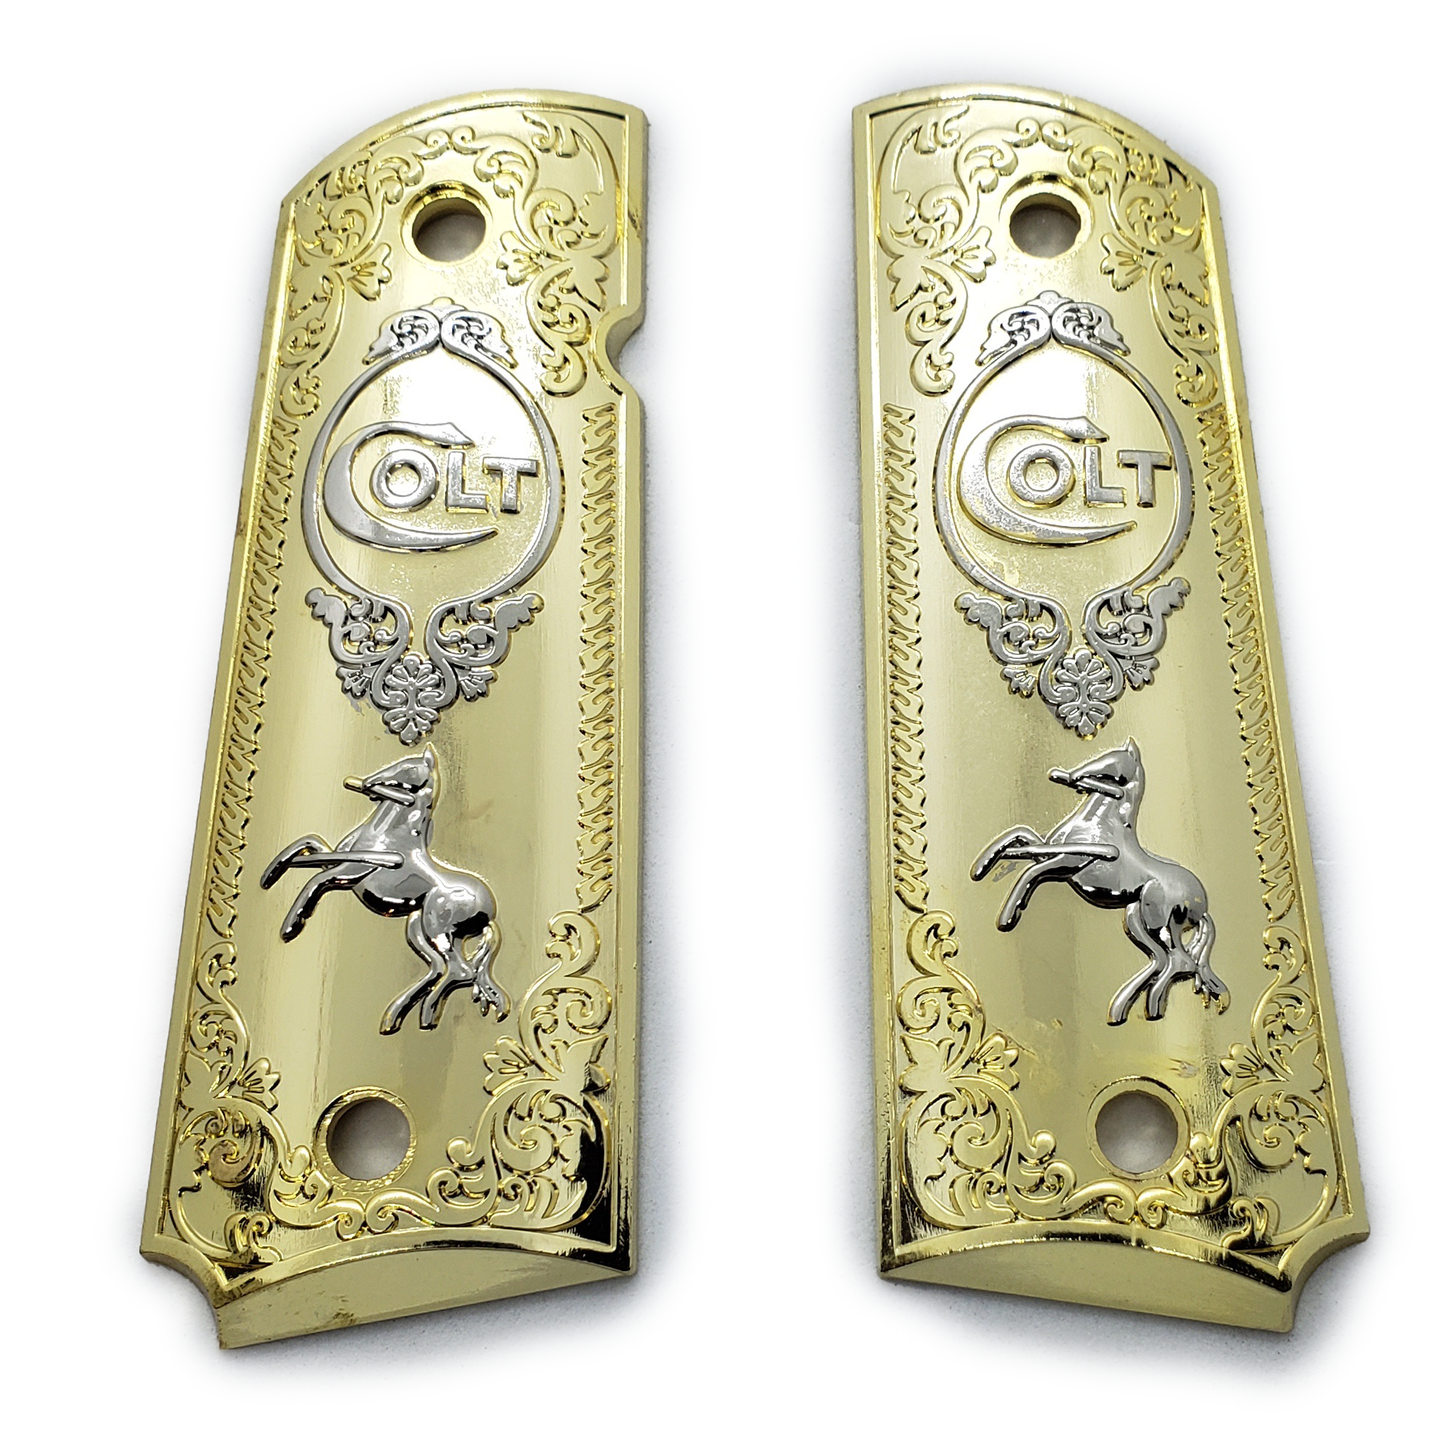 Metal grips Nickel / Gold Colt Rampant Scrollwork Ambi Safety #T-C603